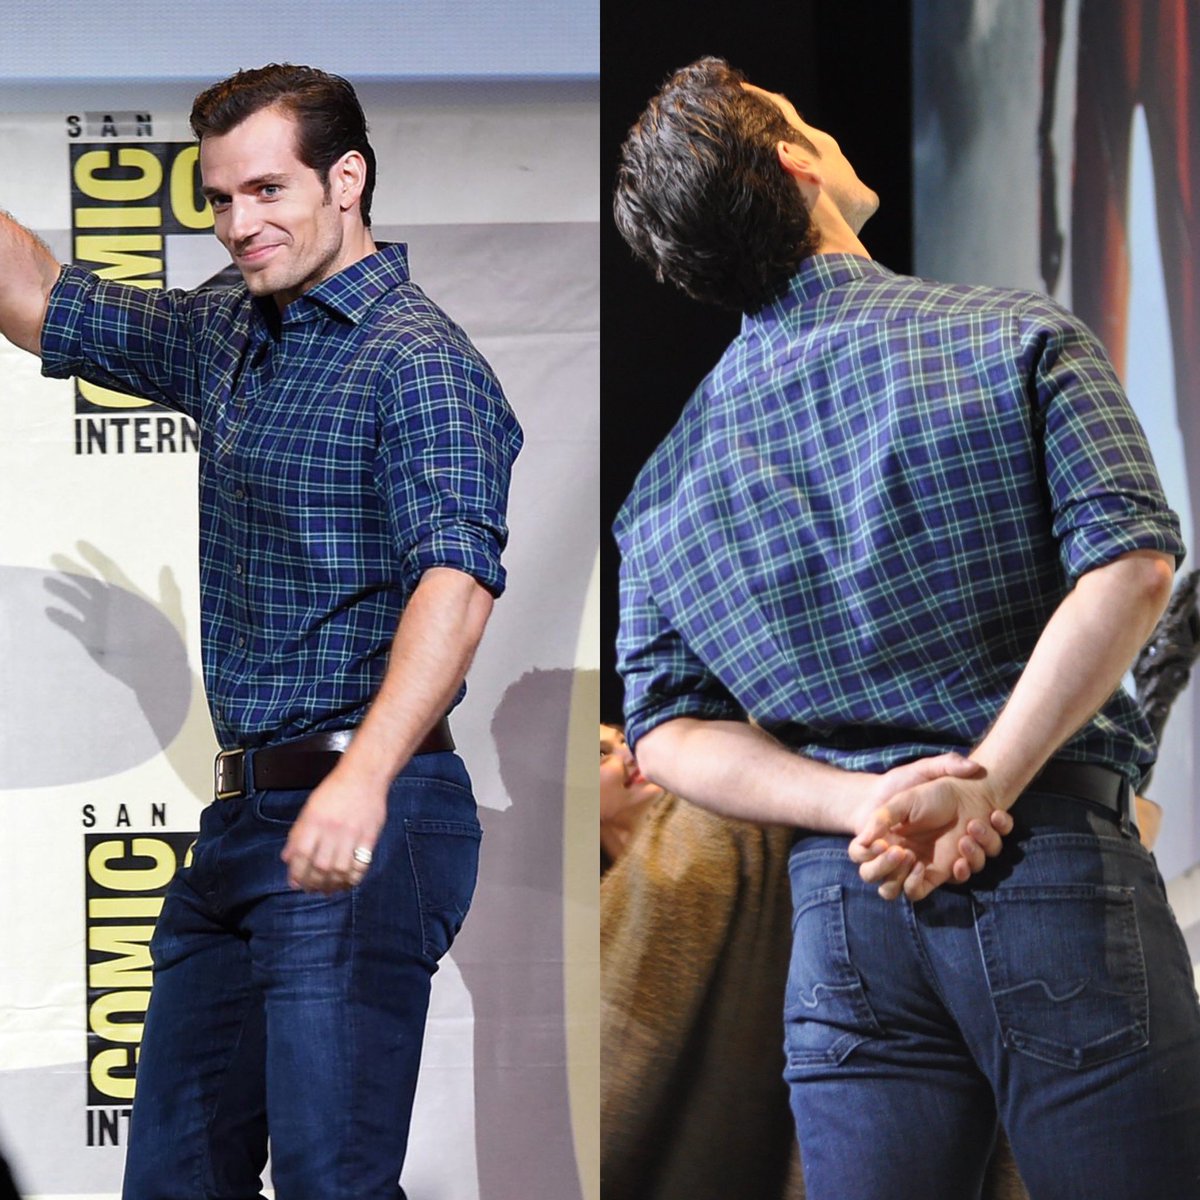 henry cavill at comic con but his ass gets bigger every yearpic.twitter.com...